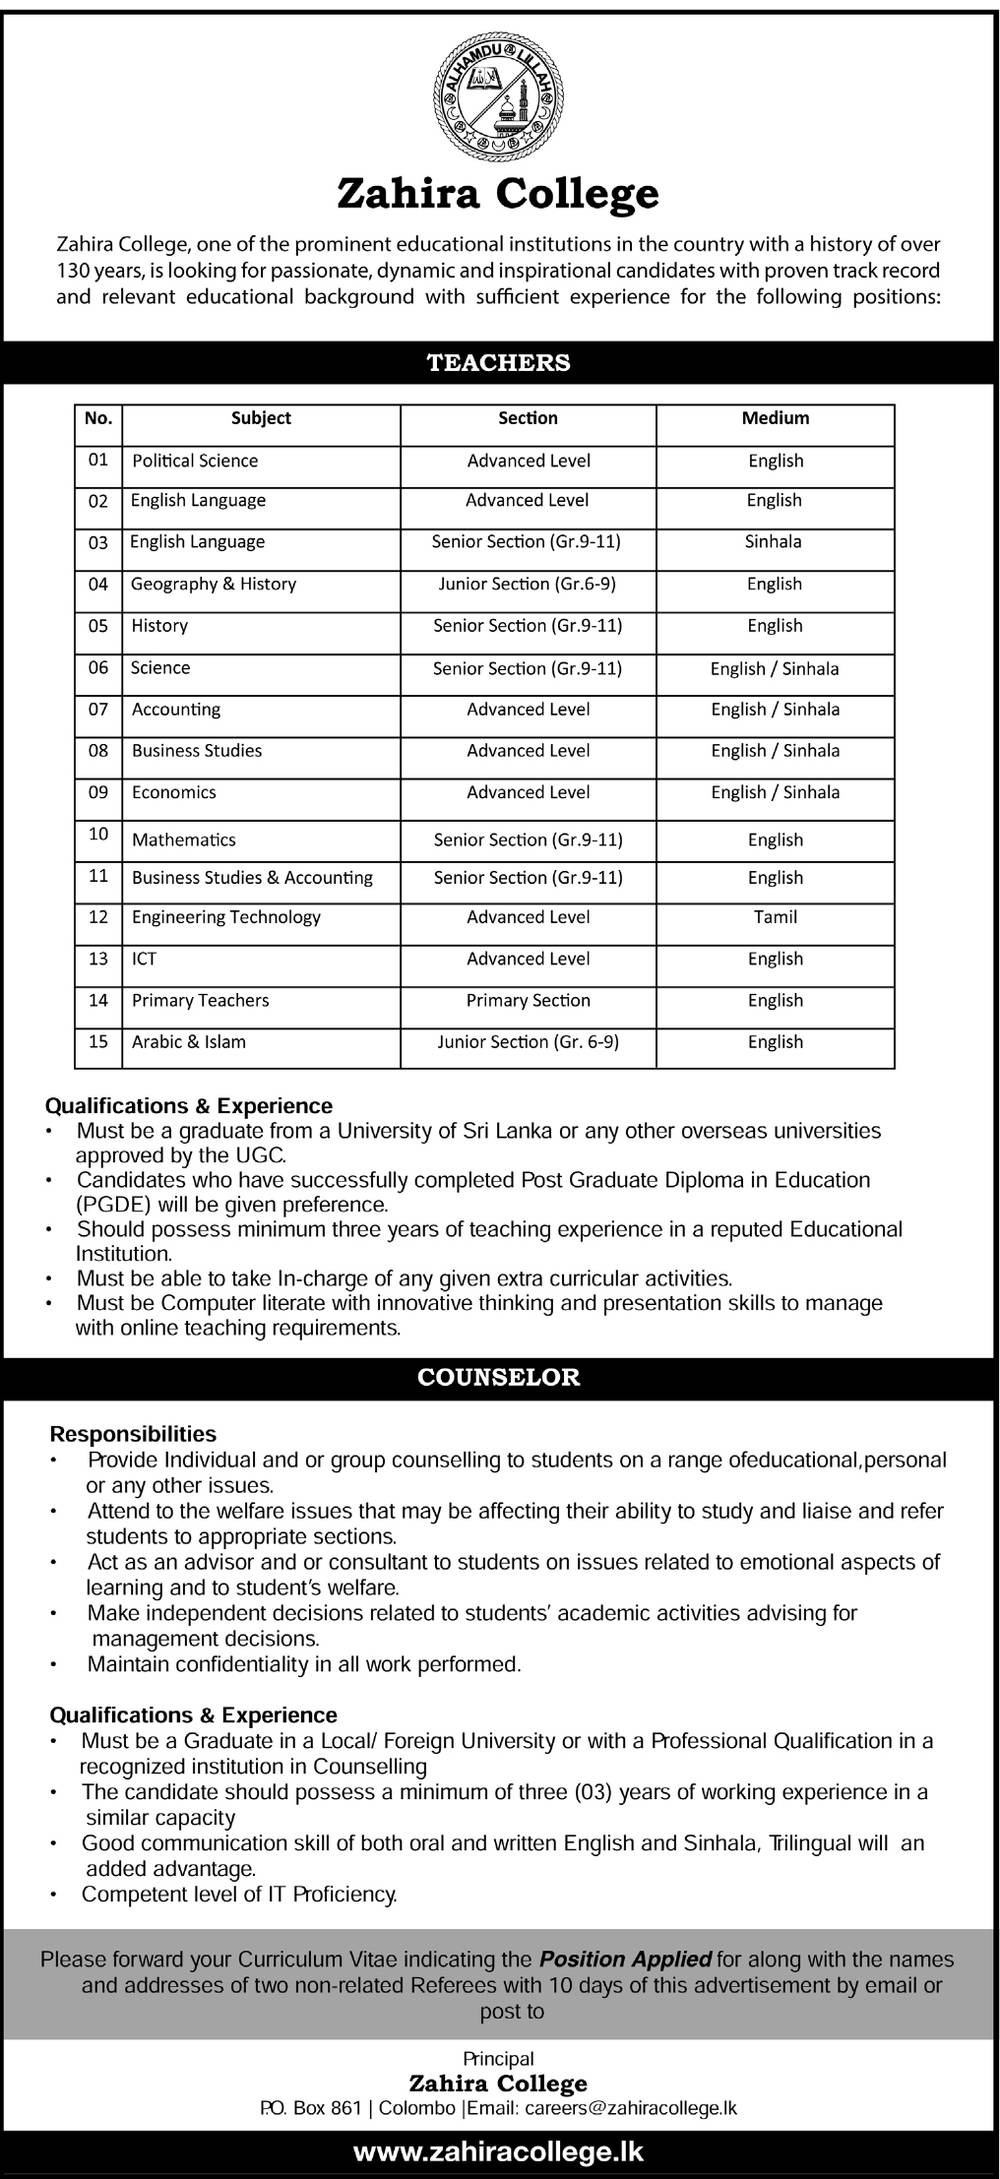 Vacancy in Zahira Collage - Teachers, teacher jobs teaching jobs near me teaching assistant jobs english teacher tuition teacher teacher vacancy tefl jobs teachers assistant teaching english preschool jobs near me tutor jobs near me application for teaching job english teacher jobs teaching assistant jobs near me esl jobs remote teaching jobs preschool teacher jobs online quran teaching jobs music teacher jobs home tutor jobs near me teacher vacancy near me govt teacher vacancy 2021 part time teaching jobs dance teacher jobs history teacher jobs teaching vacancies 2021 virtual teaching jobs sen teaching assistant jobs for teachers teaching english online without a degree govt teaching jobs 2021 science teacher jobs preschool teacher jobs near me teaching assistant qualifications kindergarten teacher jobs english teachers preschool jobs government teaching jobs primary teacher vacancy math teacher jobs teacher job vacancy special education jobs teacher in korea education assistant jobs tuition teacher jobs near me special education teacher jobs tesol jobs drama teacher jobs tuition teacher jobs physical education teacher jobs esl teacher jobs part time teaching jobs near me montessori jobs alternative jobs for teachers jobs for retired teachers biology teacher jobs primary teacher jobs early childhood jobs elementary teaching jobs near me vacancies for teachers in government schools geography teacher jobs gov teaching jobs govt teacher vacancy 2020 headteacher jobs psychology teacher jobs english teacher jobs near me online esl jobs montessori jobs near me social studies teacher jobs teacher job vacancy near me music teacher jobs near me online esl teaching jobs teach english online no degree application for teaching job in english teacher application dance teacher jobs near me music teacher vacancy part time teacher government teacher vacancy kindergarten jobs science teacher jobs near me teaching posts hindi teacher vacancy nursery teacher jobs supply teaching english teacher vacancy pre primary teacher vacancy primary teacher jobs near me an english teacher vacancy in schools govt teacher vacancy mfl teacher non teaching jobs in schools gov teaching vacancies part time teaching assistant jobs sen teaching assistant jobs math teacher jobs near me tefl jobs abroad teach english abroad jobs assistant teacher vacancies teacher training jobs esol jobs teaching agency german teacher jobs part time tutoring jobs special educator vacancy teaching kindergarten teaching esl jobs for teachers outside of education early years teacher jobs teach away jobs kindergarten jobs near me montessori teacher jobs freelance teacher piano teacher jobs chinese teacher jobs online quran teaching jobs at home tuition teacher vacancy near me jobs in education not teaching home tutor job physical education teacher vacancy teaching overseas online teaching companies law teacher jobs biology teacher vacancy guitar teacher jobs careers after teaching celta jobs business studies teacher jobs chemistry teacher vacancy physics teacher vacancy economics teacher jobs latest teaching vacancies teach from home jobs primary teacher vacancy near me maths teacher vacancy application for post of teacher english teacher vacancy near me tefl online teaching jobs tuition teacher vacancy teaching position best english teacher teaching opportunities teaching careers biology teacher jobs near me ami montessori jobs commerce teacher vacancy best teaching english online government jobs for teachers outside of education non teaching jobs in education teaching english to chinese online preschool assistant jobs teachers wanted nursery teacher jobs near me byjus jobs for teachers remote english teaching jobs tefl teaching jobs special needs teaching assistant kindergarten teacher vacancy teach english online to korean students architecture teaching jobs science teacher vacancy near me teaching preschool home economics teacher sen teaching quran teacher jobs chemistry teacher vacancy near me jobs for teachers near me online music teaching jobs nursery teacher vacancy near me preschool teacher vacancy economics teacher vacancy kindergarten assistant jobs job vacancy in schools near me mathematics teacher jobs teaching jobs without degree apply for teaching jobs non native english teacher jobs new teacher vacancy geography teacher vacancy nursery teacher vacancy chemistry teacher jobs near me mathematics teacher vacancy catholic teaching jobs violin teacher jobs french teacher vacancy primary teaching assistant jobs drama teacher jobs near me highest paying teaching jobs teaching english as a second language online online esl companies volunteer teaching assistant ict teacher jobs topjobs teaching preschool teacher vacancy near me trainee teacher jobs tesl jobs maths lecturer jobs it teacher jobs vacancy for teachers near me english teacher qualifications drawing teacher vacancy best paying online teaching jobs educational consulting jobs preschool teacher assistant jobs nursery teaching my dream job teacher pre primary teacher government job sports teacher jobs media teacher jobs teaching jobs overseas for certified teachers vacancy for primary teacher near me experienced teacher tutor needed near me job of a teacher non chinese esl companies preschool vacancies near me tutor vacancy near me online teaching jobs for freshers dance teacher vacancy freelance english teacher teaching vacancies in international schools creative writing teaching jobs part time english teacher seek teaching jobs relief teaching sports teacher vacancy montessori teacher vacancy near me preschool assistant teacher jobs near me work of teacher online quran teaching jobs 2021 unqualified teaching assistant jobs highest paid teaching jobs abroad teaching english as a second language jobs primary teacher job vacancies british council teaching jobs qualifications needed to be an english teacher agriculture teacher jobs anatomy teaching jobs drum teacher jobs online primary teaching jobs online teaching assistant jobs sanskrit jobs primary teaching jobs abroad part time english teacher jobs engoo tutor apply deputy principal jobs economics teacher vacancy near me arabic teacher jobs near me home tutor vacancy law teacher vacancy religion teacher jobs teaching english as foreign language special education teacher vacancy online female quran teacher jobs primary teacher application theology teacher jobs teaching assistant jobs no experience history teacher vacancy technology teacher jobs korean teaching jobs english teacher job vacancy leaving teaching jobs graphic design teacher jobs primary assistant teacher job application for the post of teacher new teaching jobs vacancies for english teachers in government schools teachers working from home working as a teacher kindergarten vacancy near me business studies teacher vacancies special education assistant jobs english teaching assistant psychology teacher vacancy private tuition teacher social science teacher vacancy special teacher vacancy topjobs teaching vacancies 2021 western province teaching vacancies 2021 part time tutoring jobs online nqt teaching jobs tuition teachers wanted english language teacher jobs sinhala medium teacher vacancies 2021 30 alternative careers for teachers online teaching jobs for primary classes near me remote teaching positions automotive teaching jobs math teacher vacancy near me online teaching jobs from home for primary students english teacher degree jobs related to teaching